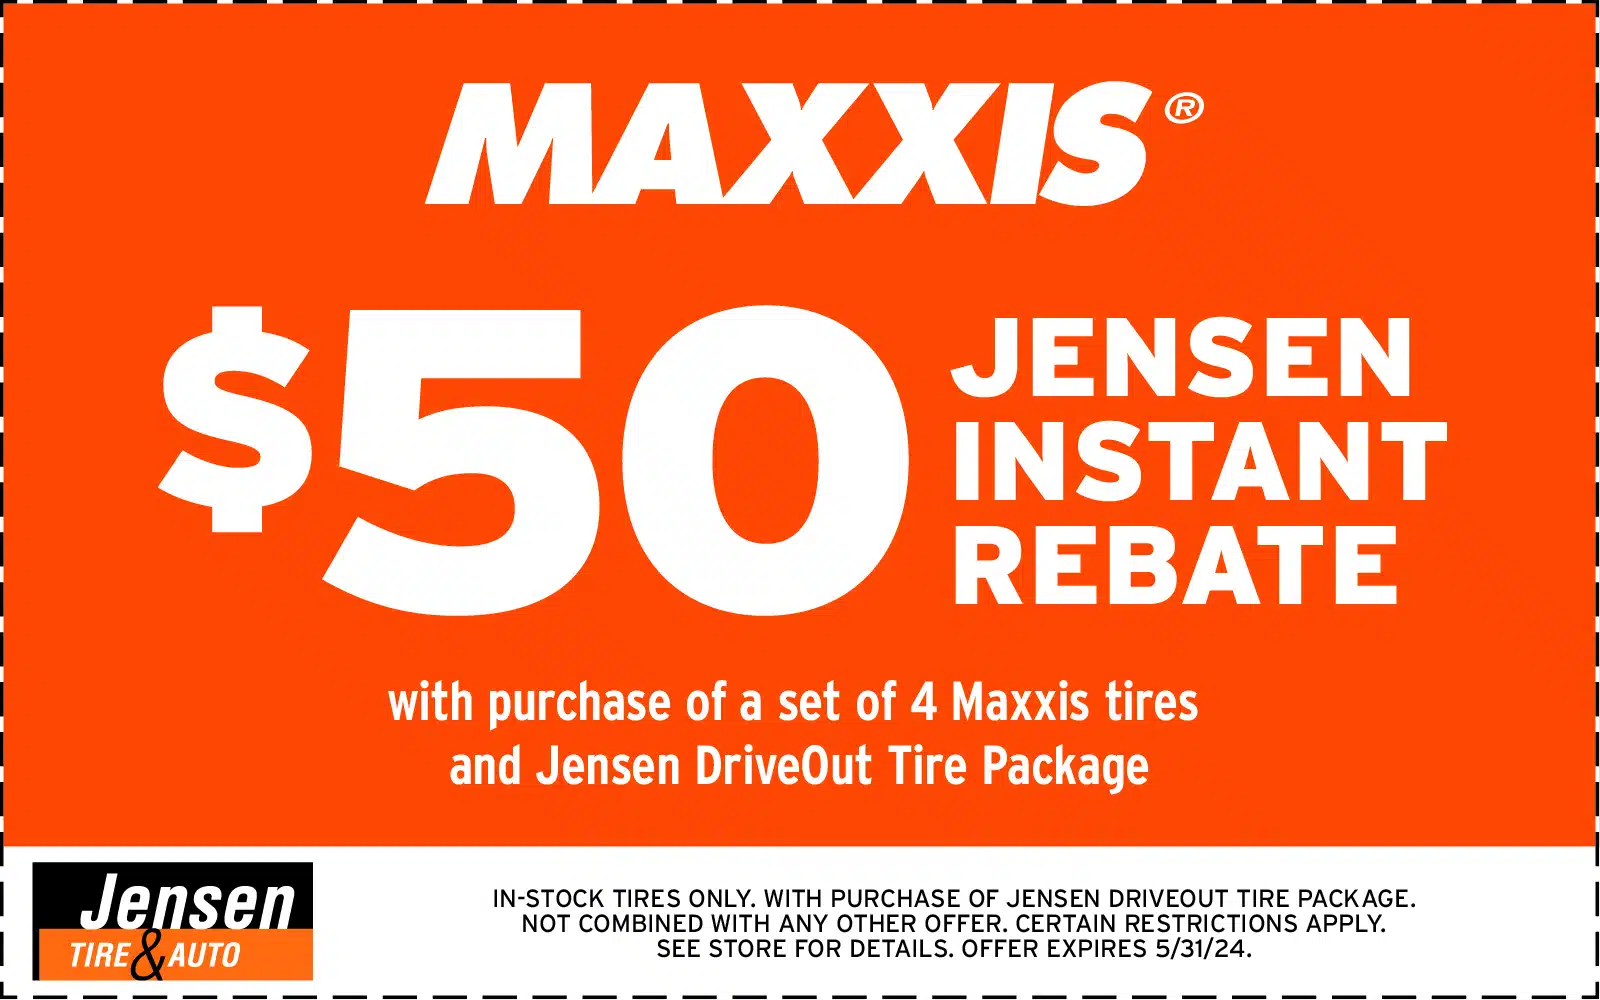 tires_maxxis_050124-052124